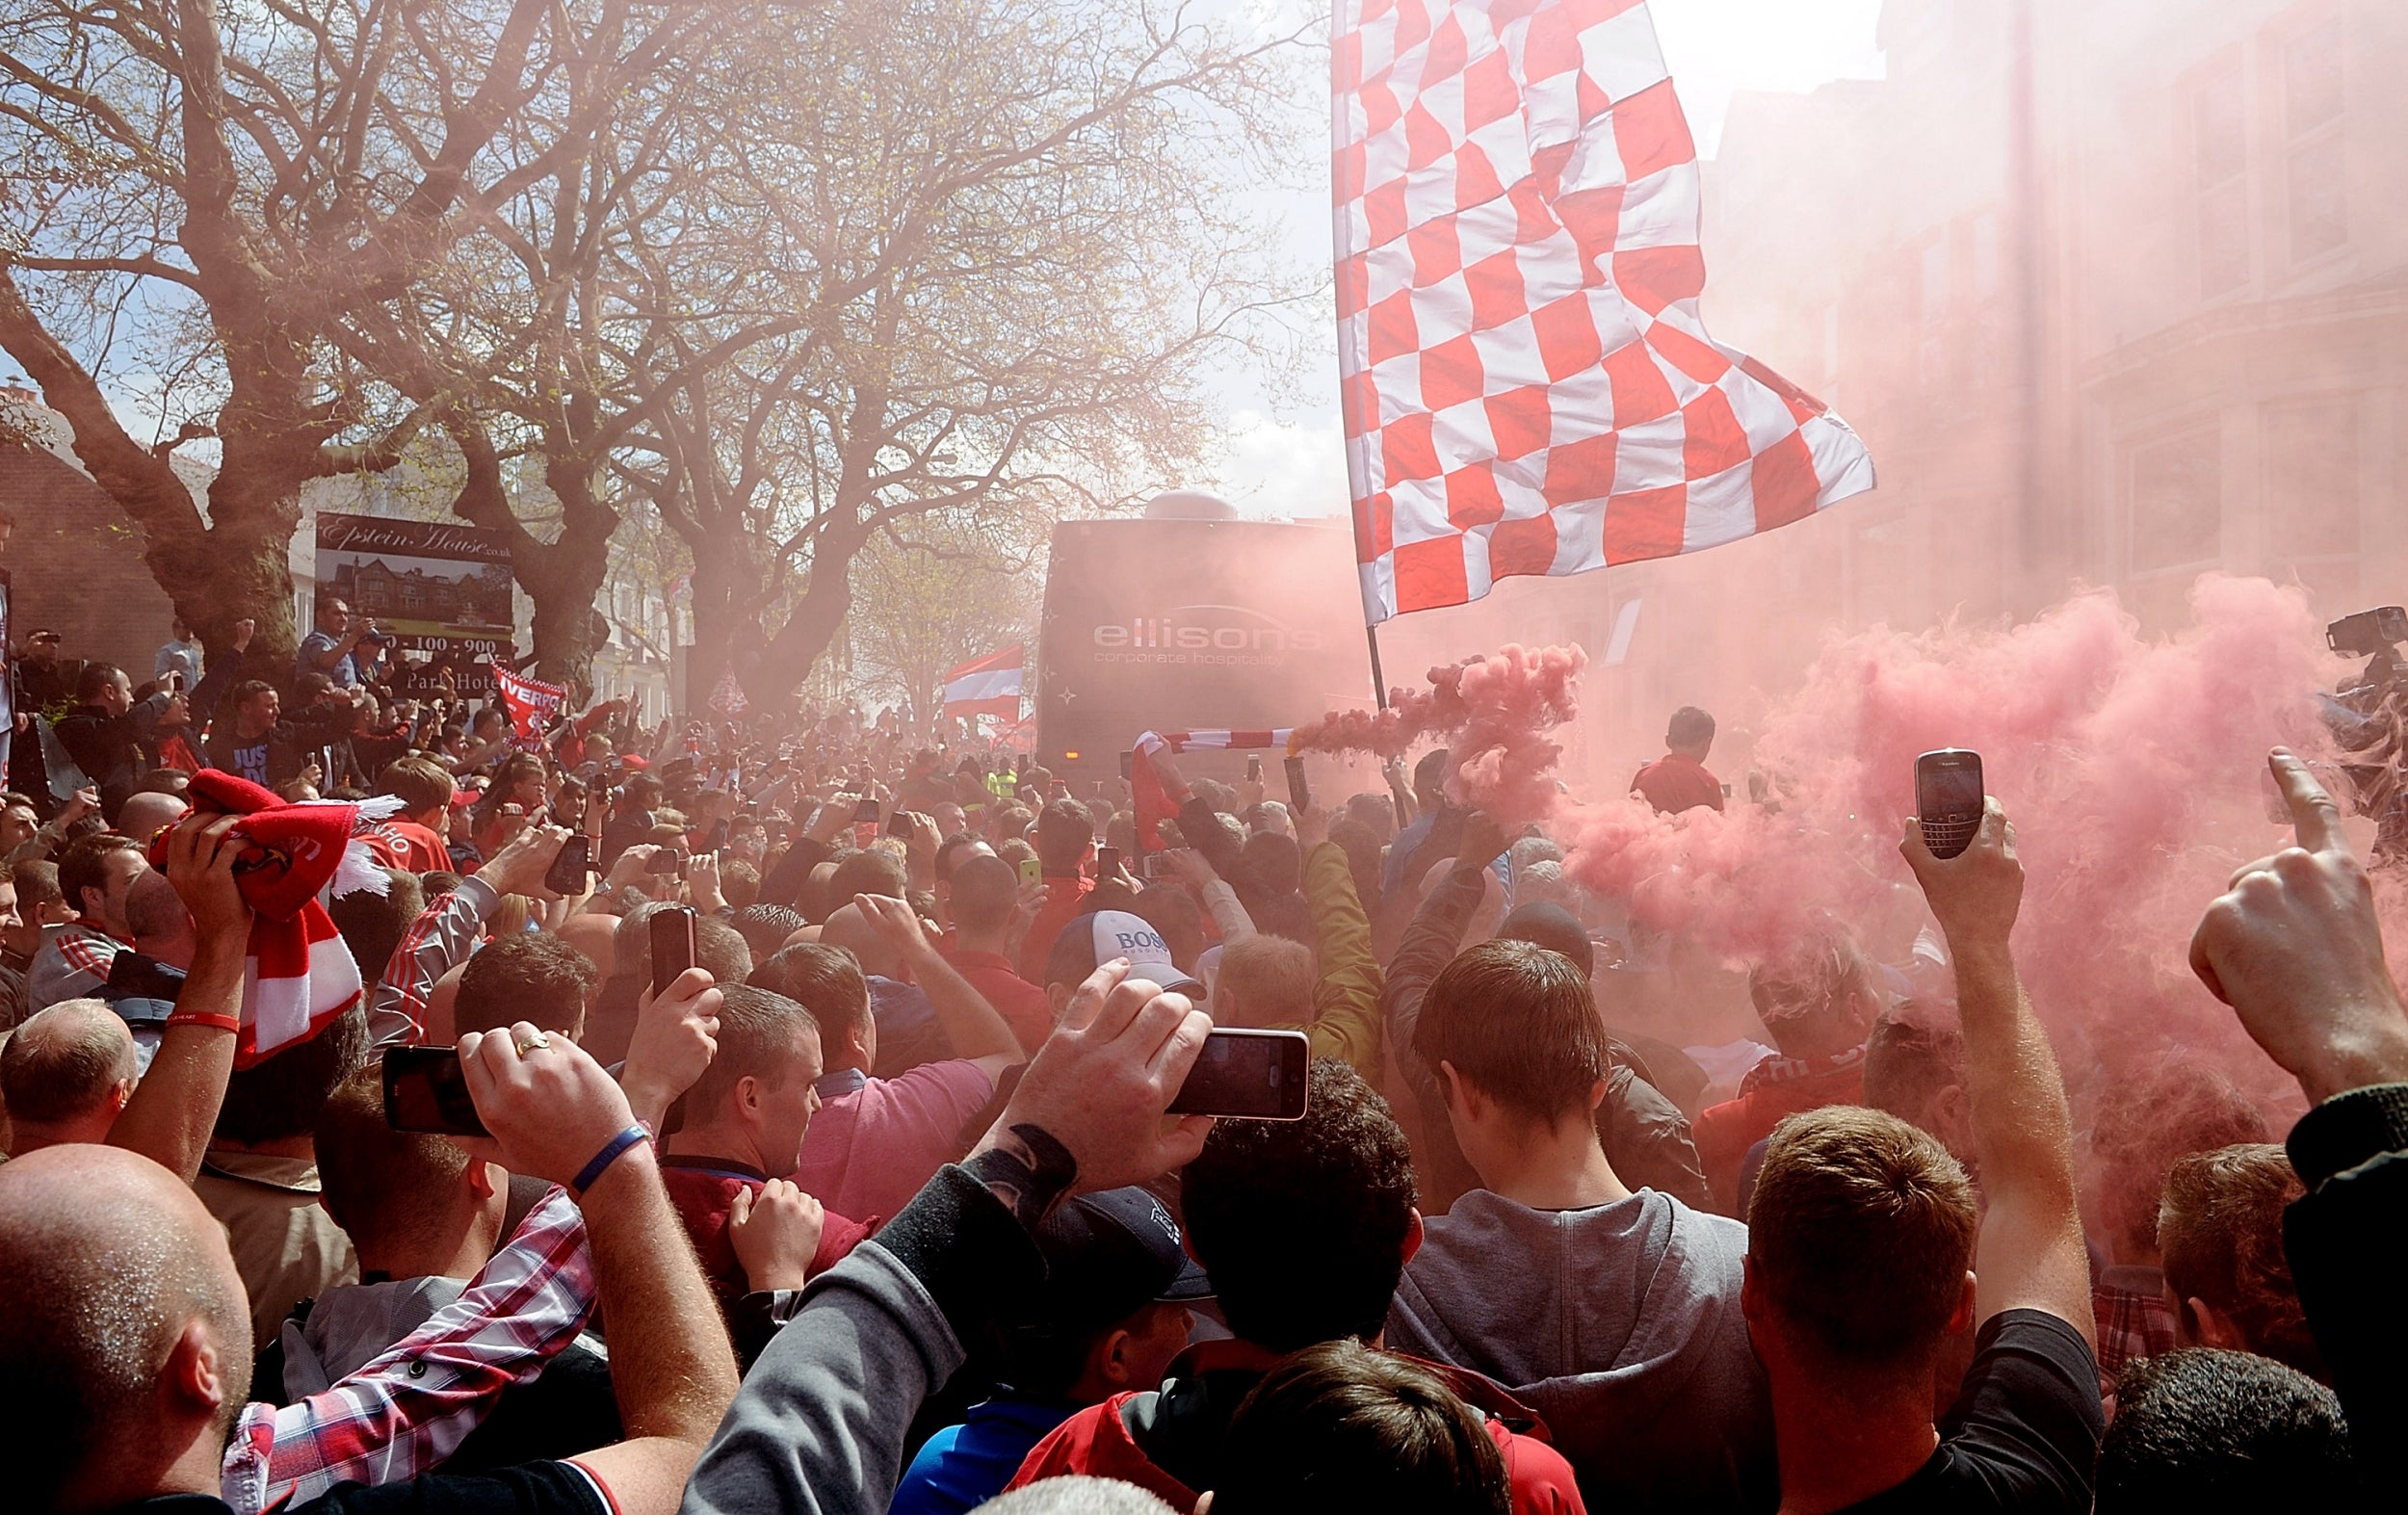 Liverpool fans lined the streets before the game (Liverpool FC via Getty Images)